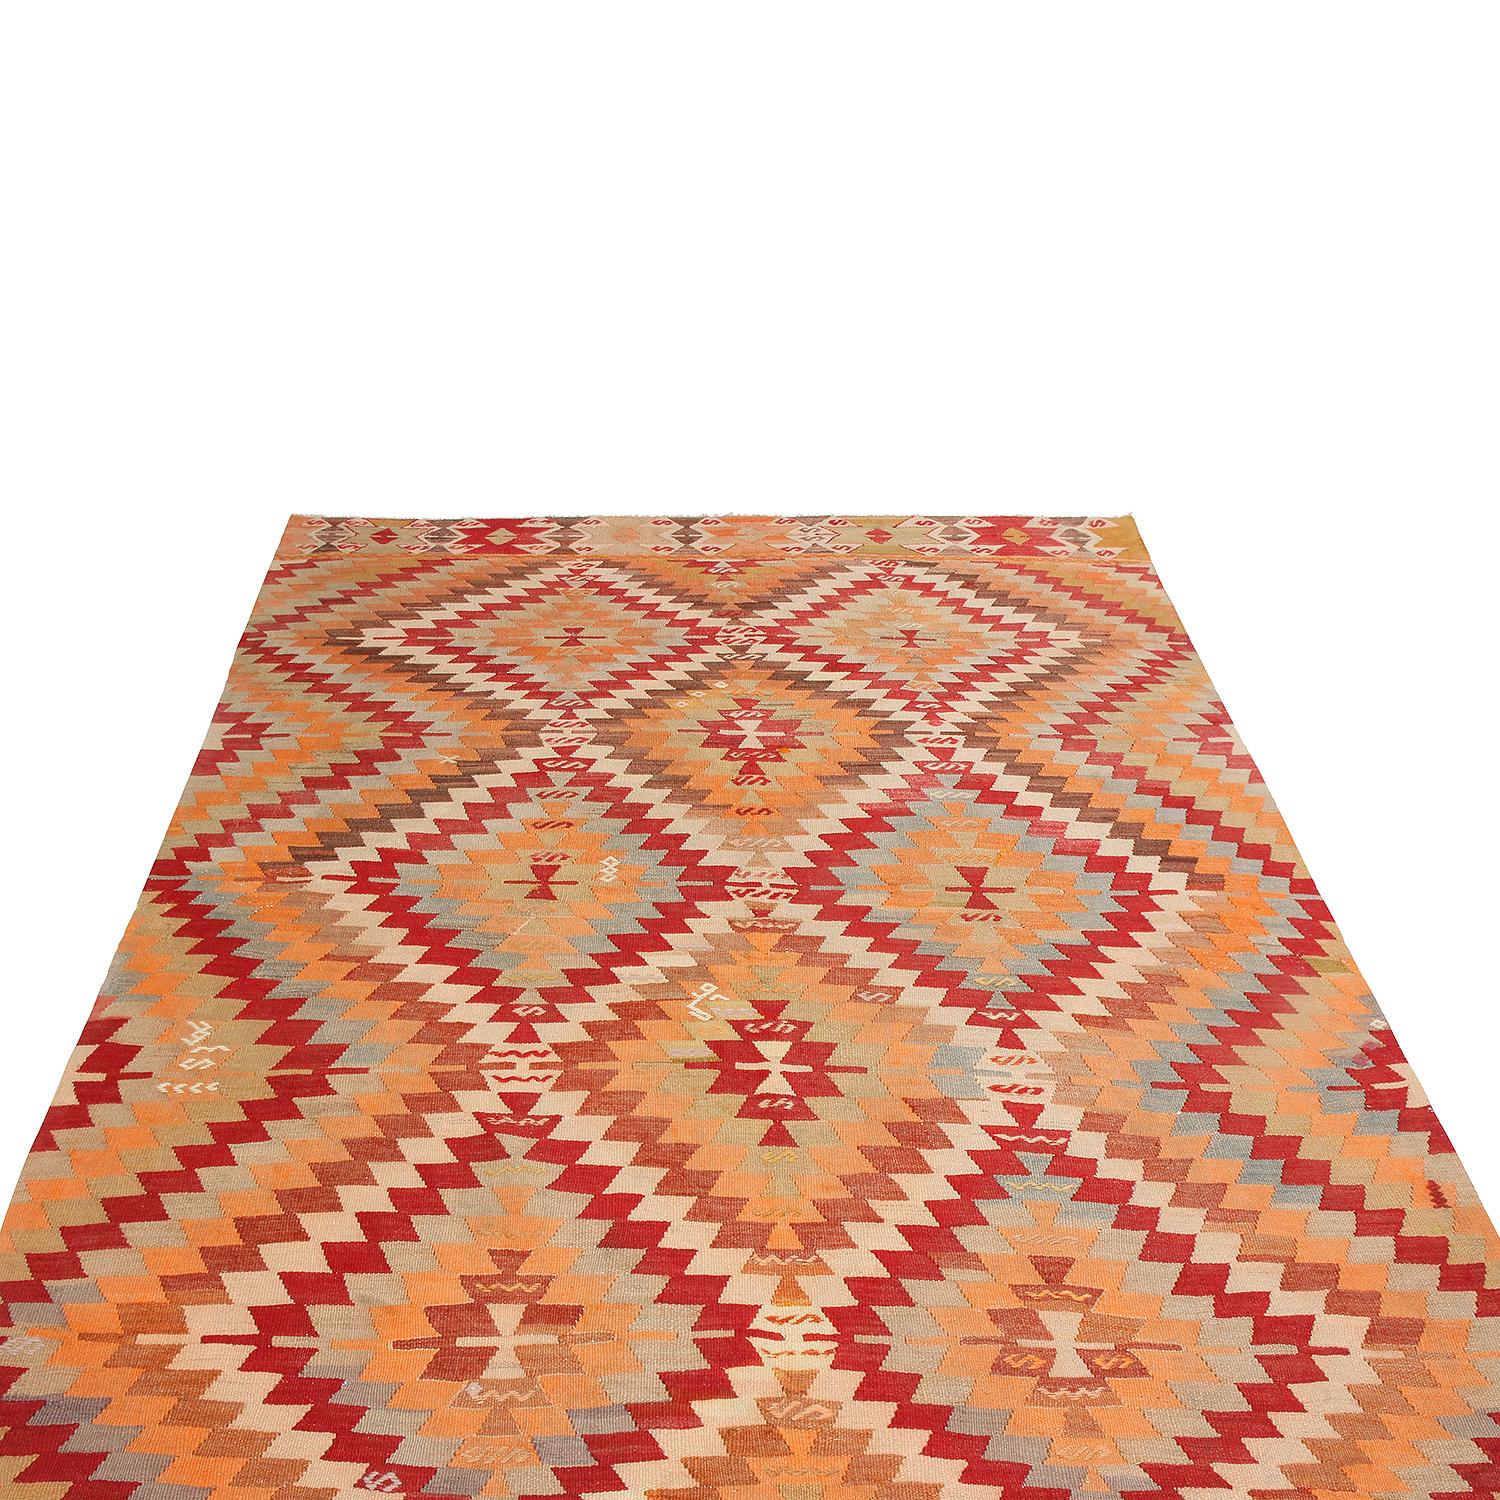 Flat woven in high-quality wool originating from Turkey between 1940-1950, this vintage hand-woven Kilim rug enjoys an atypical emphasis on golden-yellow colorways particular to a select number of designs from this era, further complemented by rich